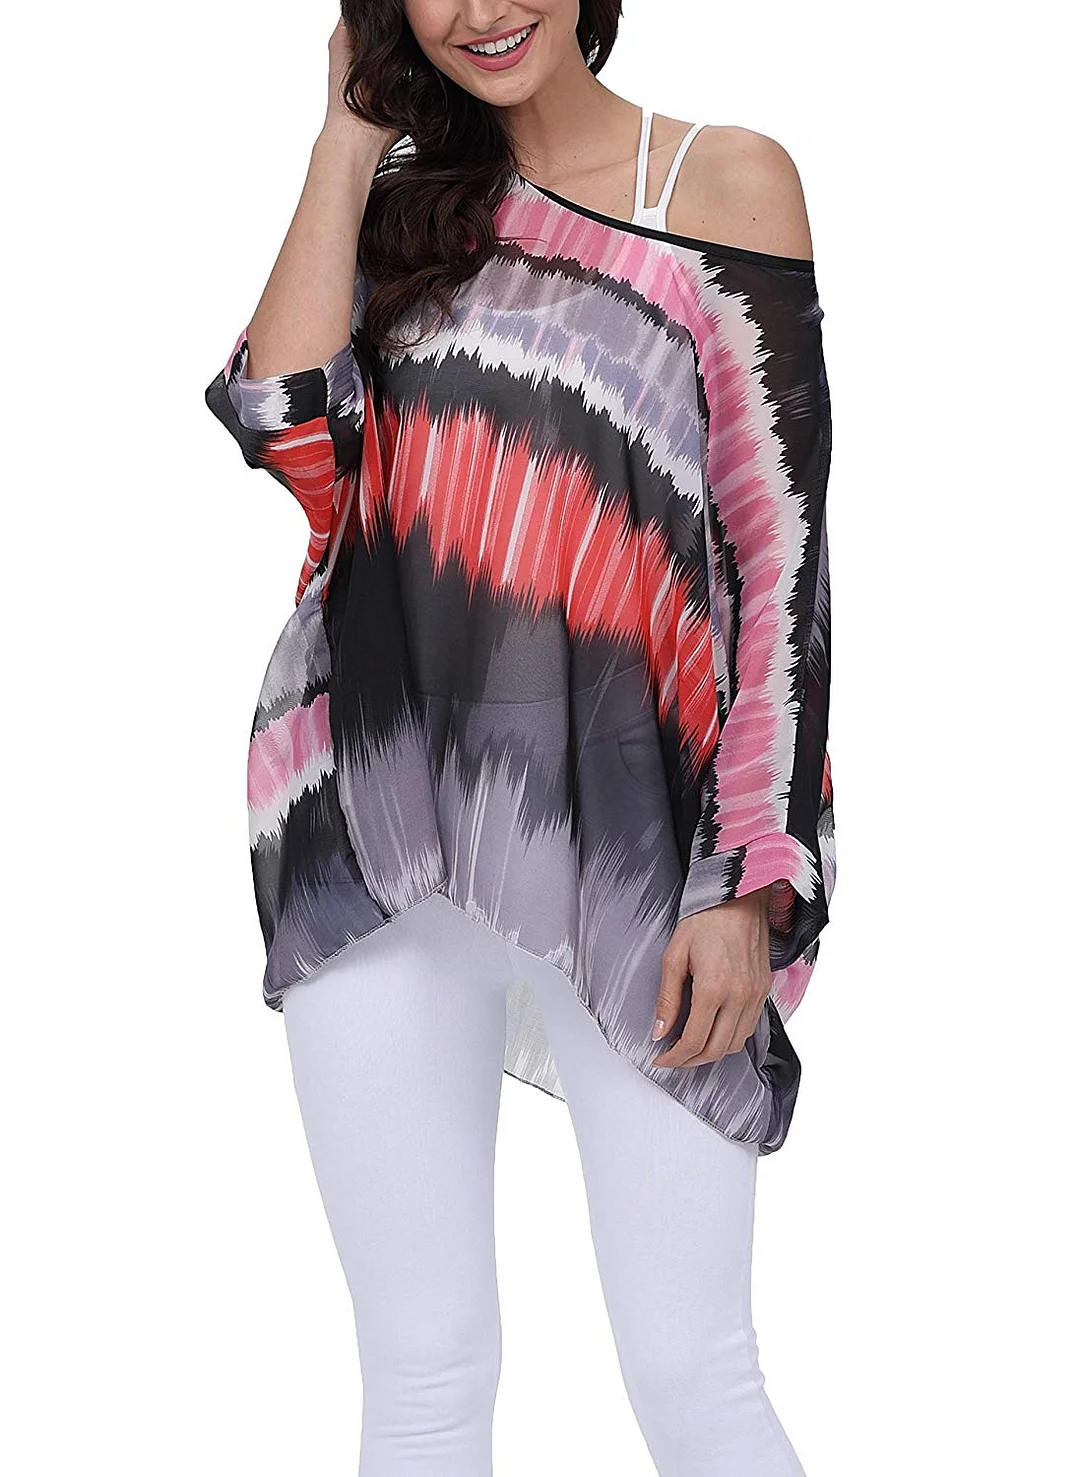 Women Stylish Summer Floral Printed Shirt Batwing Sleeve Top Chiffon Poncho Casual Loose Blouse with Shoulder Off